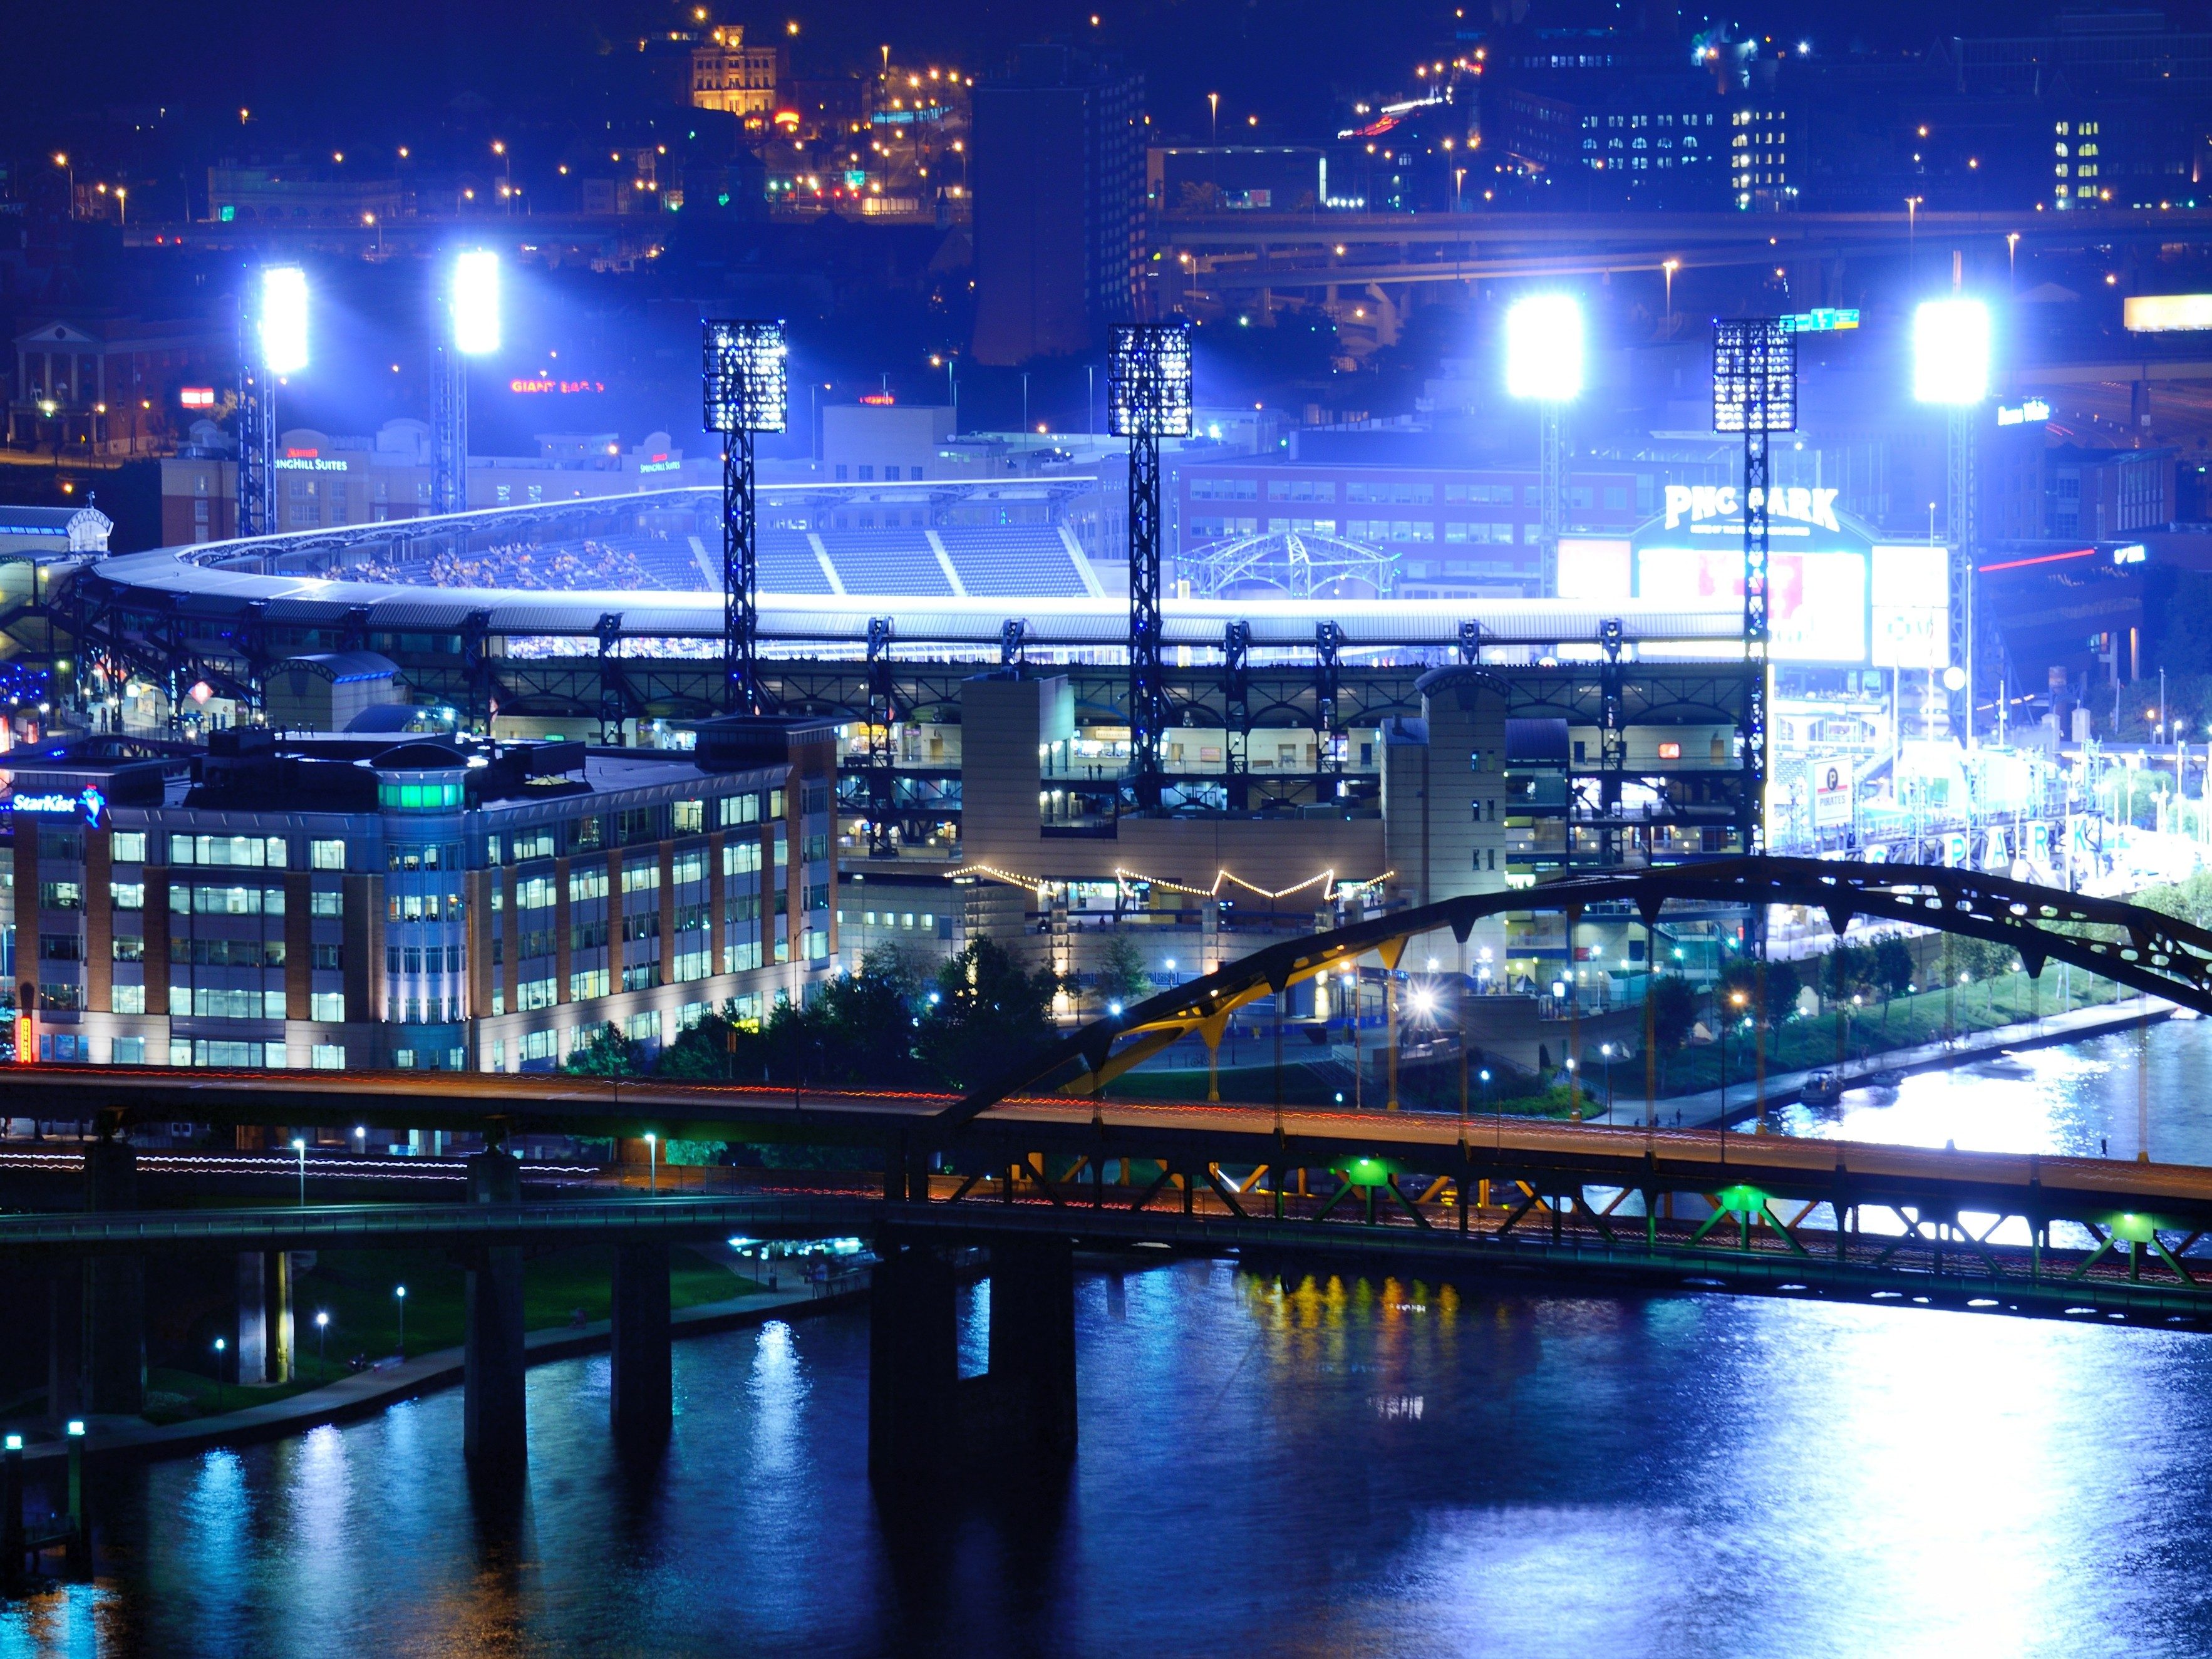 4. PNC Park - Pittsburgh, Pennsylvania; home of the Pirates.